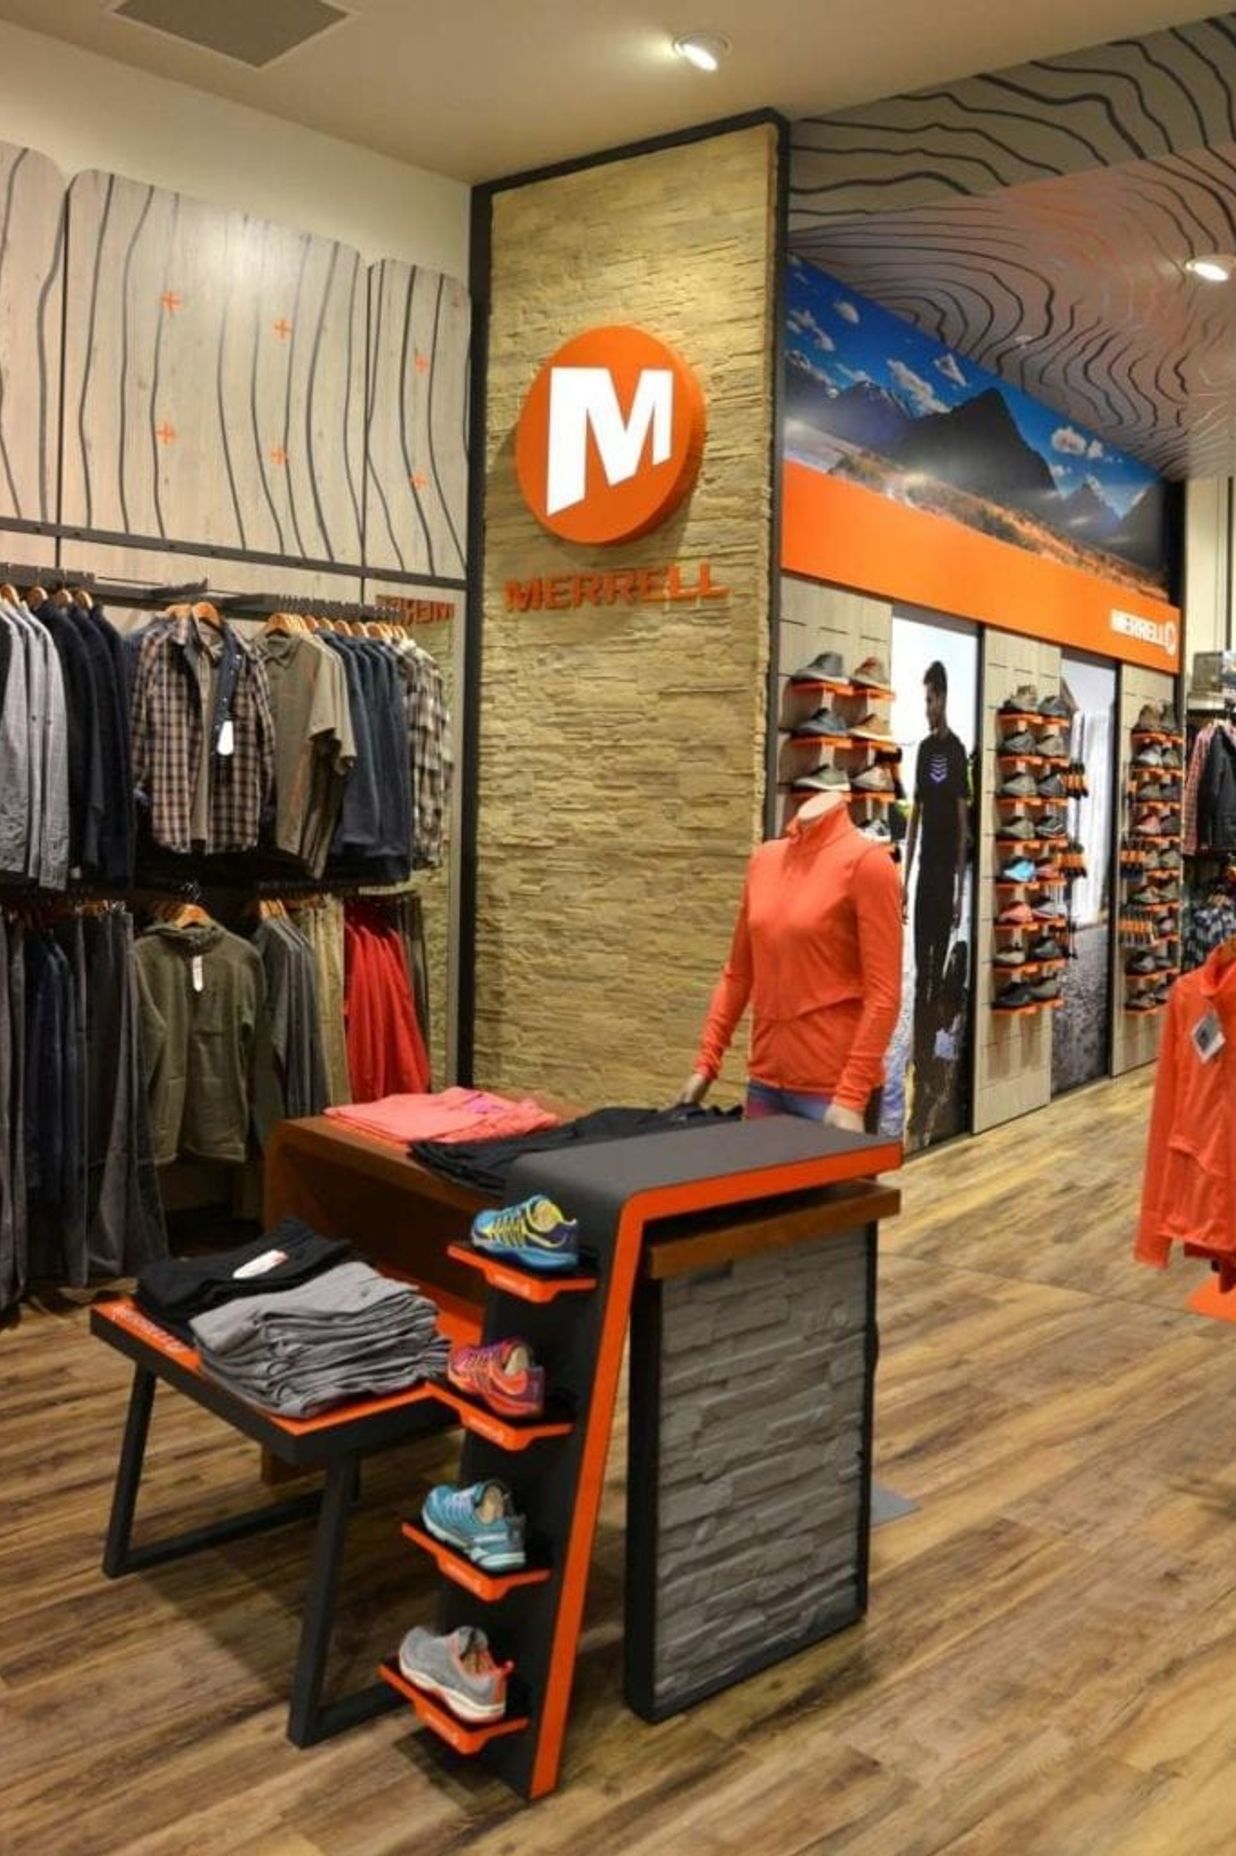 Merrell Retail Fit-Out